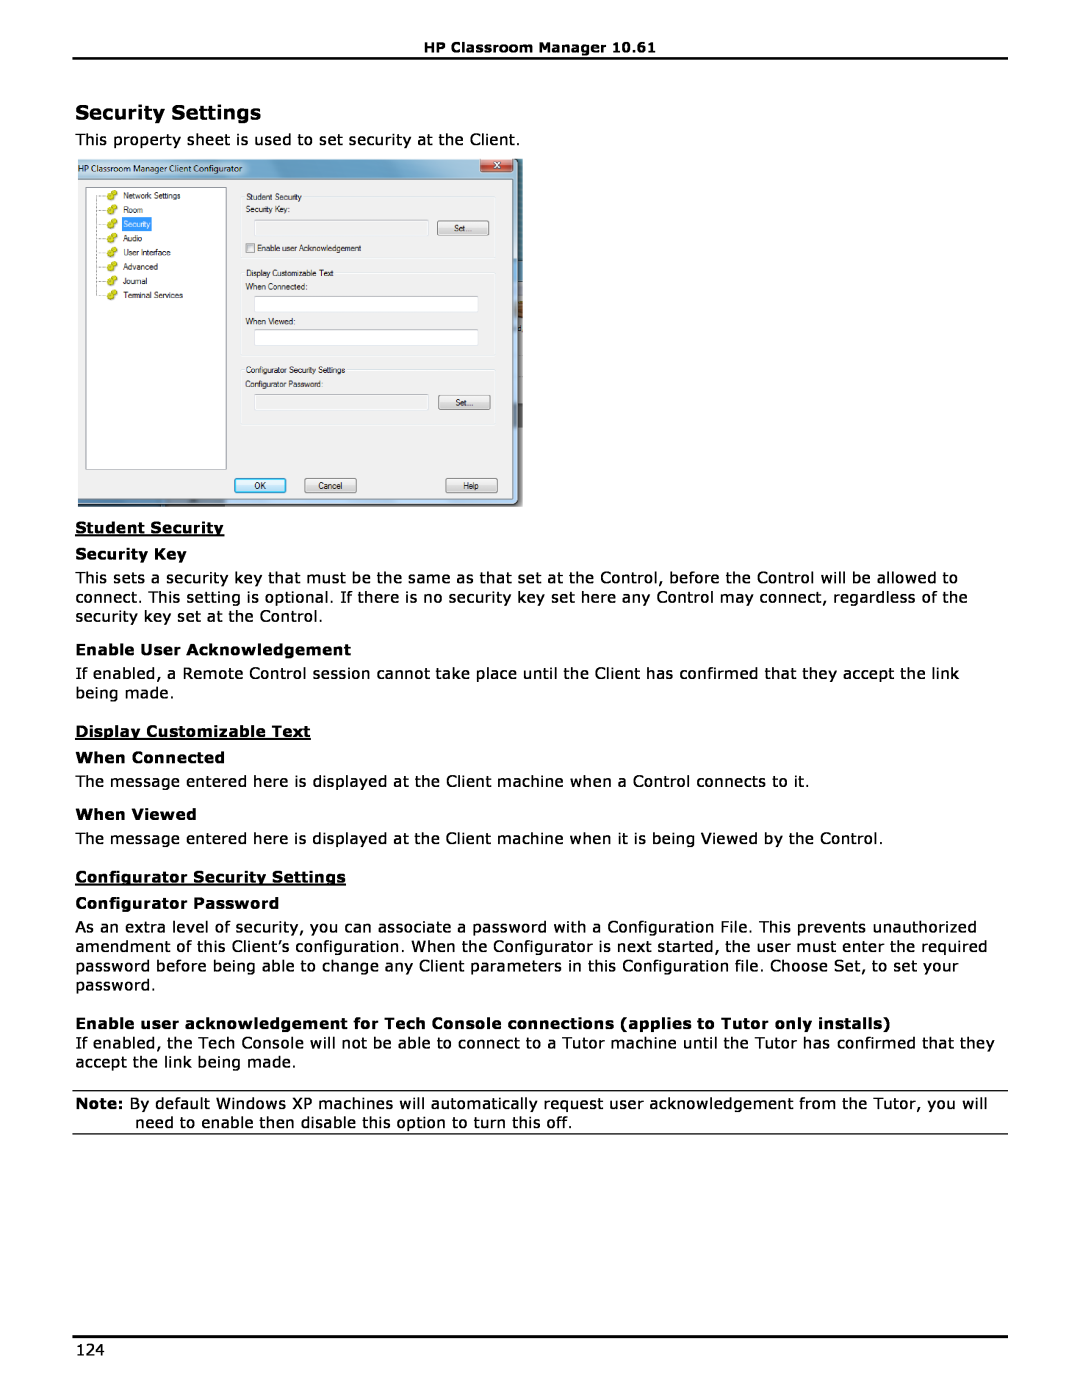 HP Classroom Manager manual Security Settings, Student Security Security Key, Enable User Acknowledgement, When Viewed 